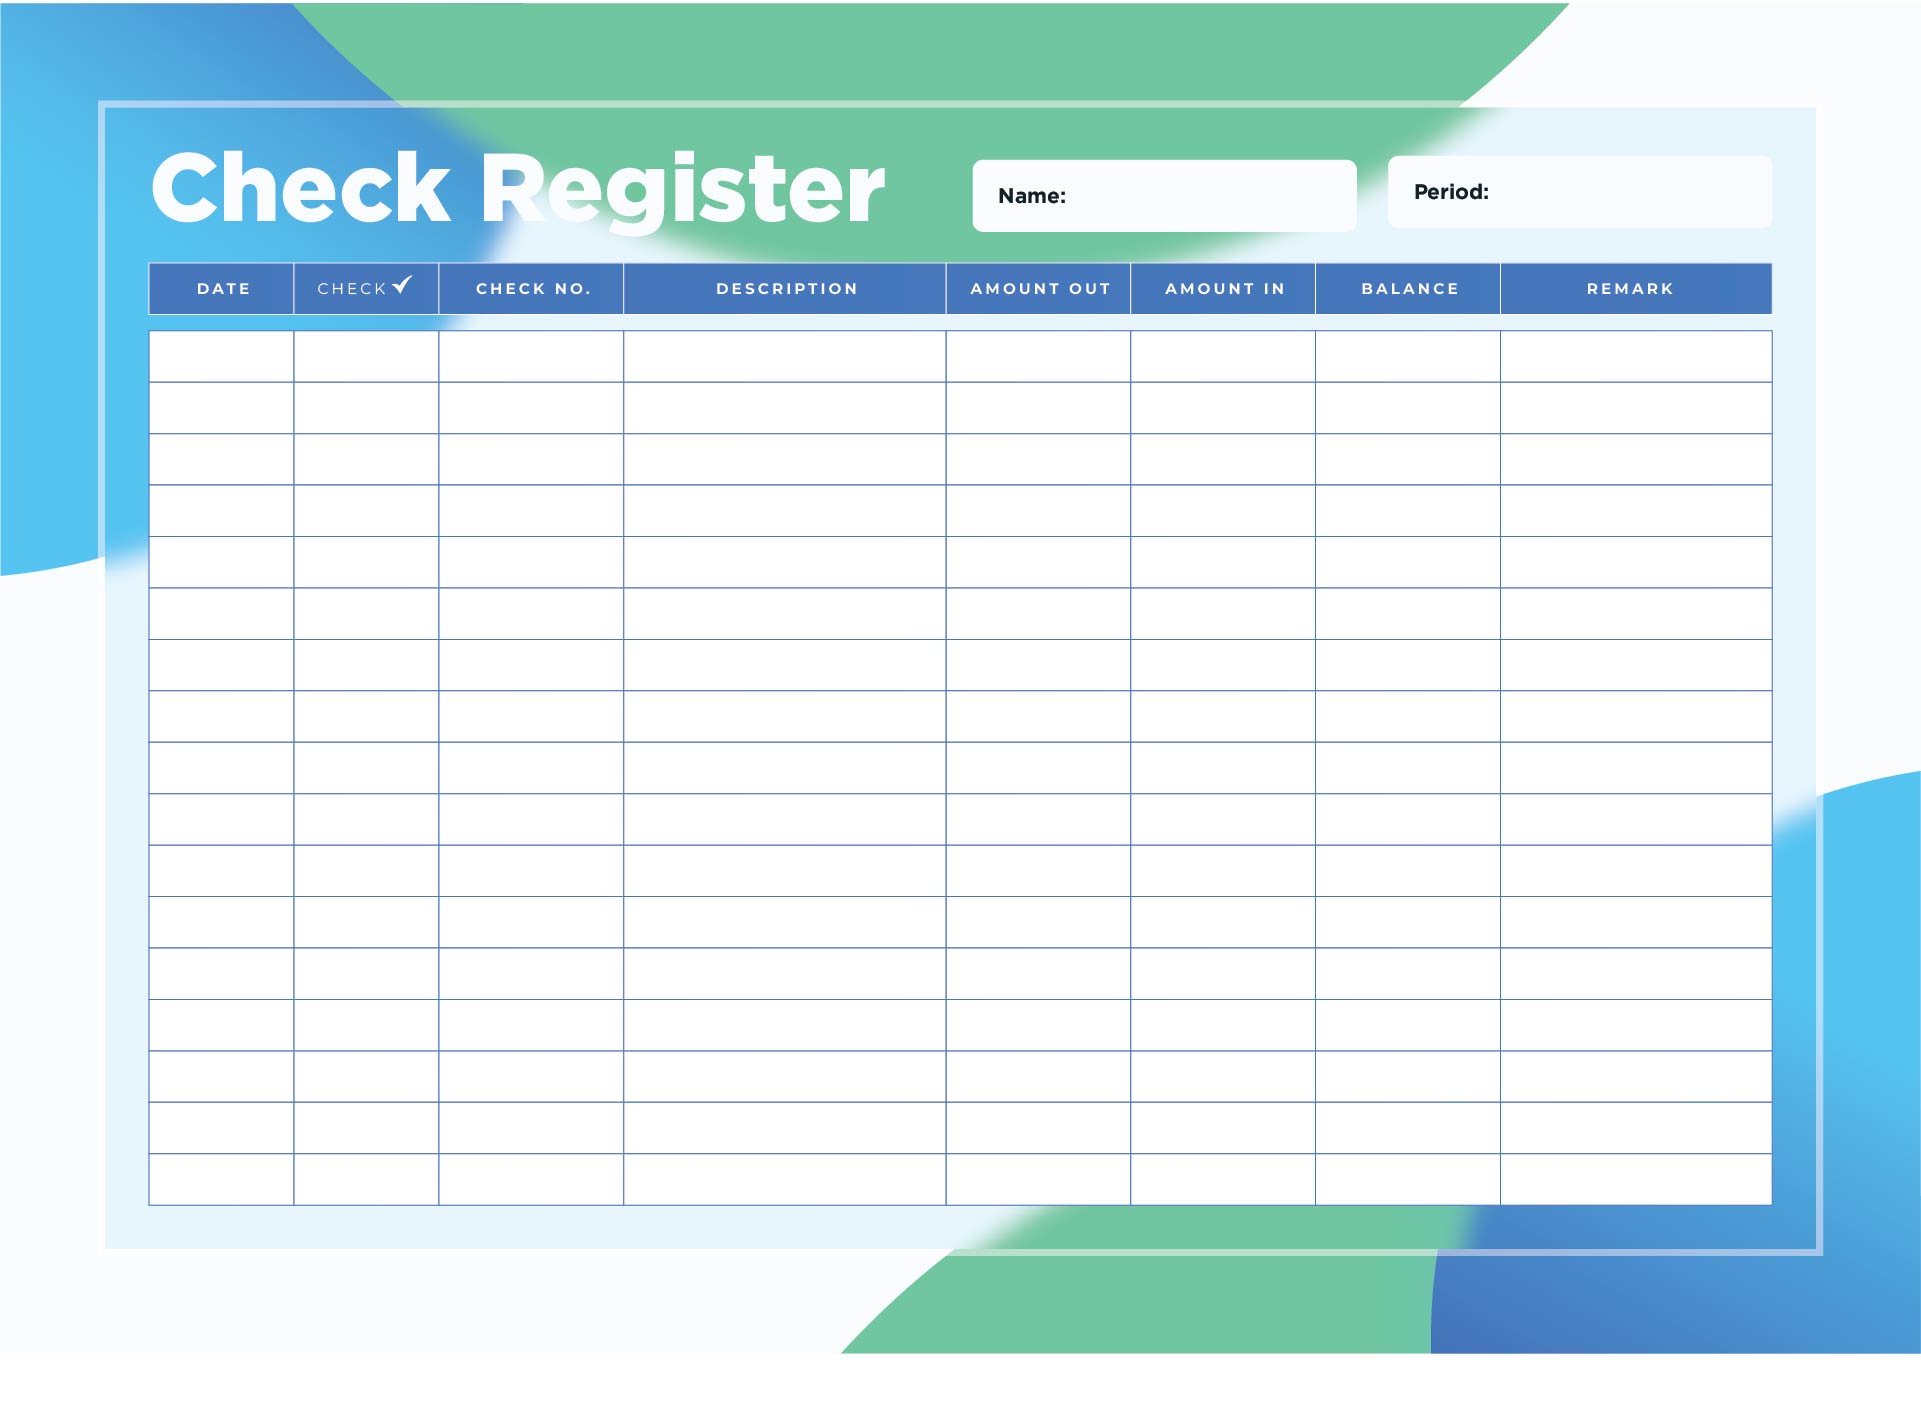 7-best-images-of-printable-check-register-for-checkbook-free-printable-check-register-sheets